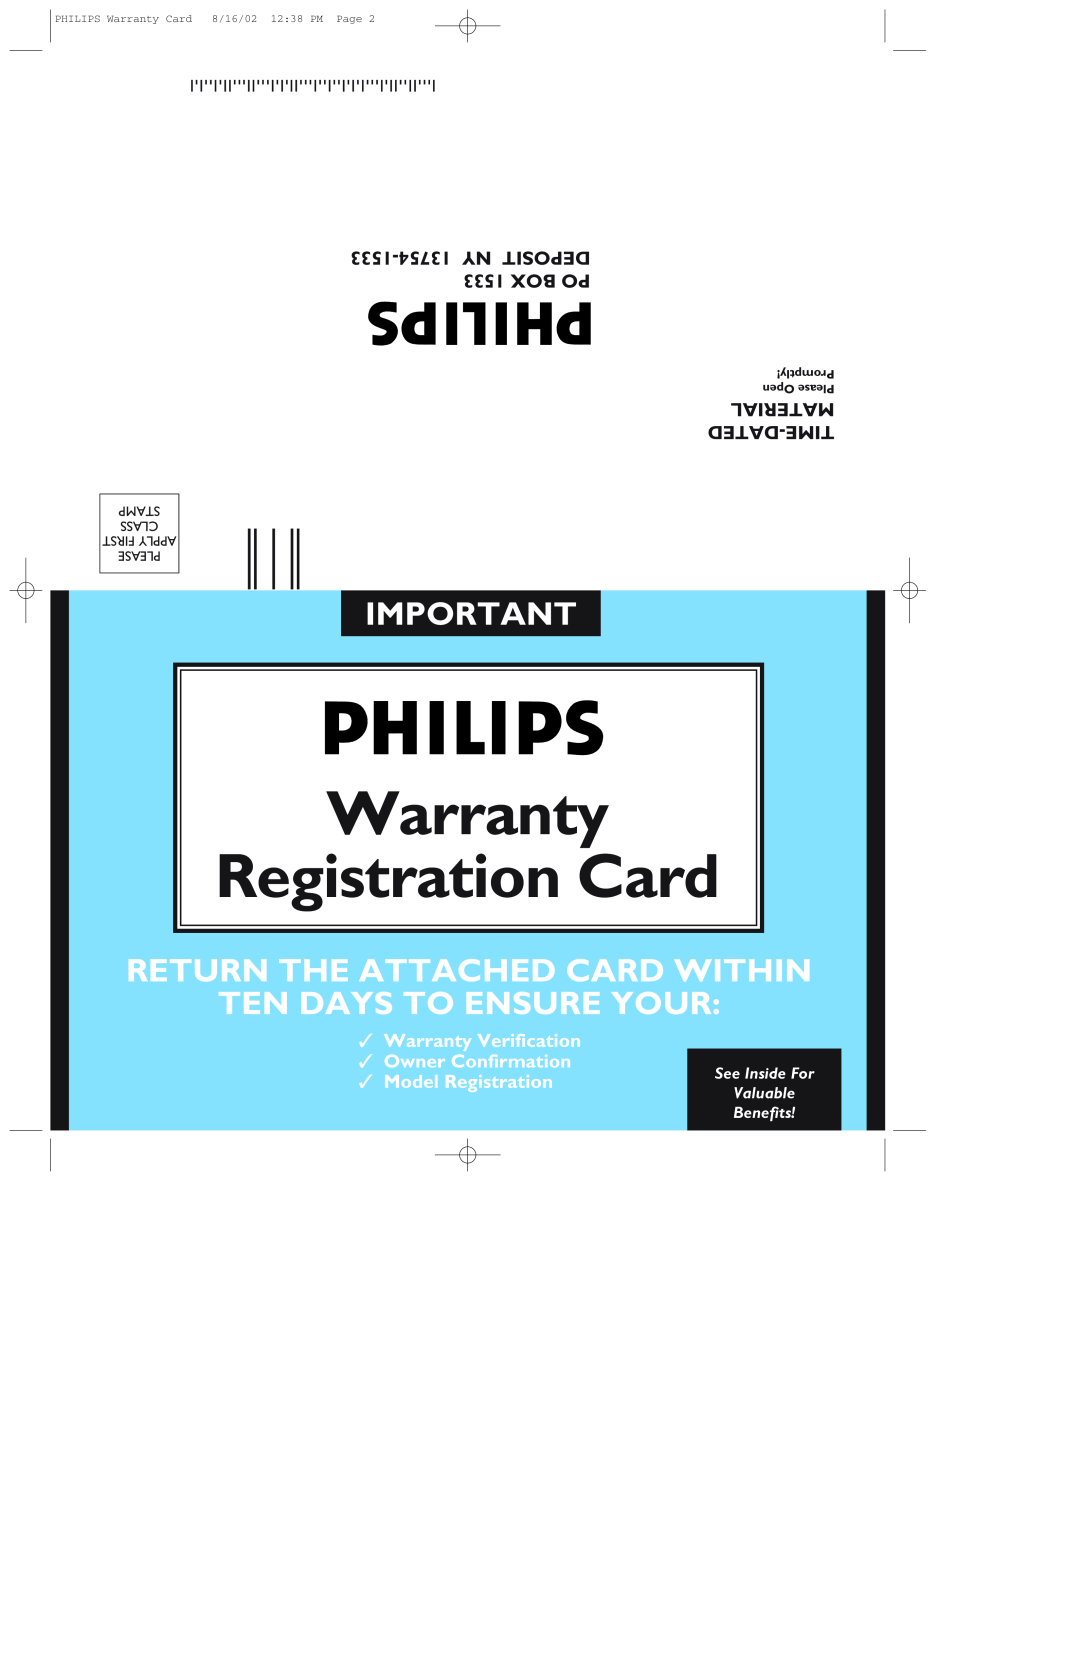 Philips 200XW7 Warranty, Registration Card, Return The Attached Card Within, Ten Days To Ensure Your, 1533-13754NY DEPOSIT 